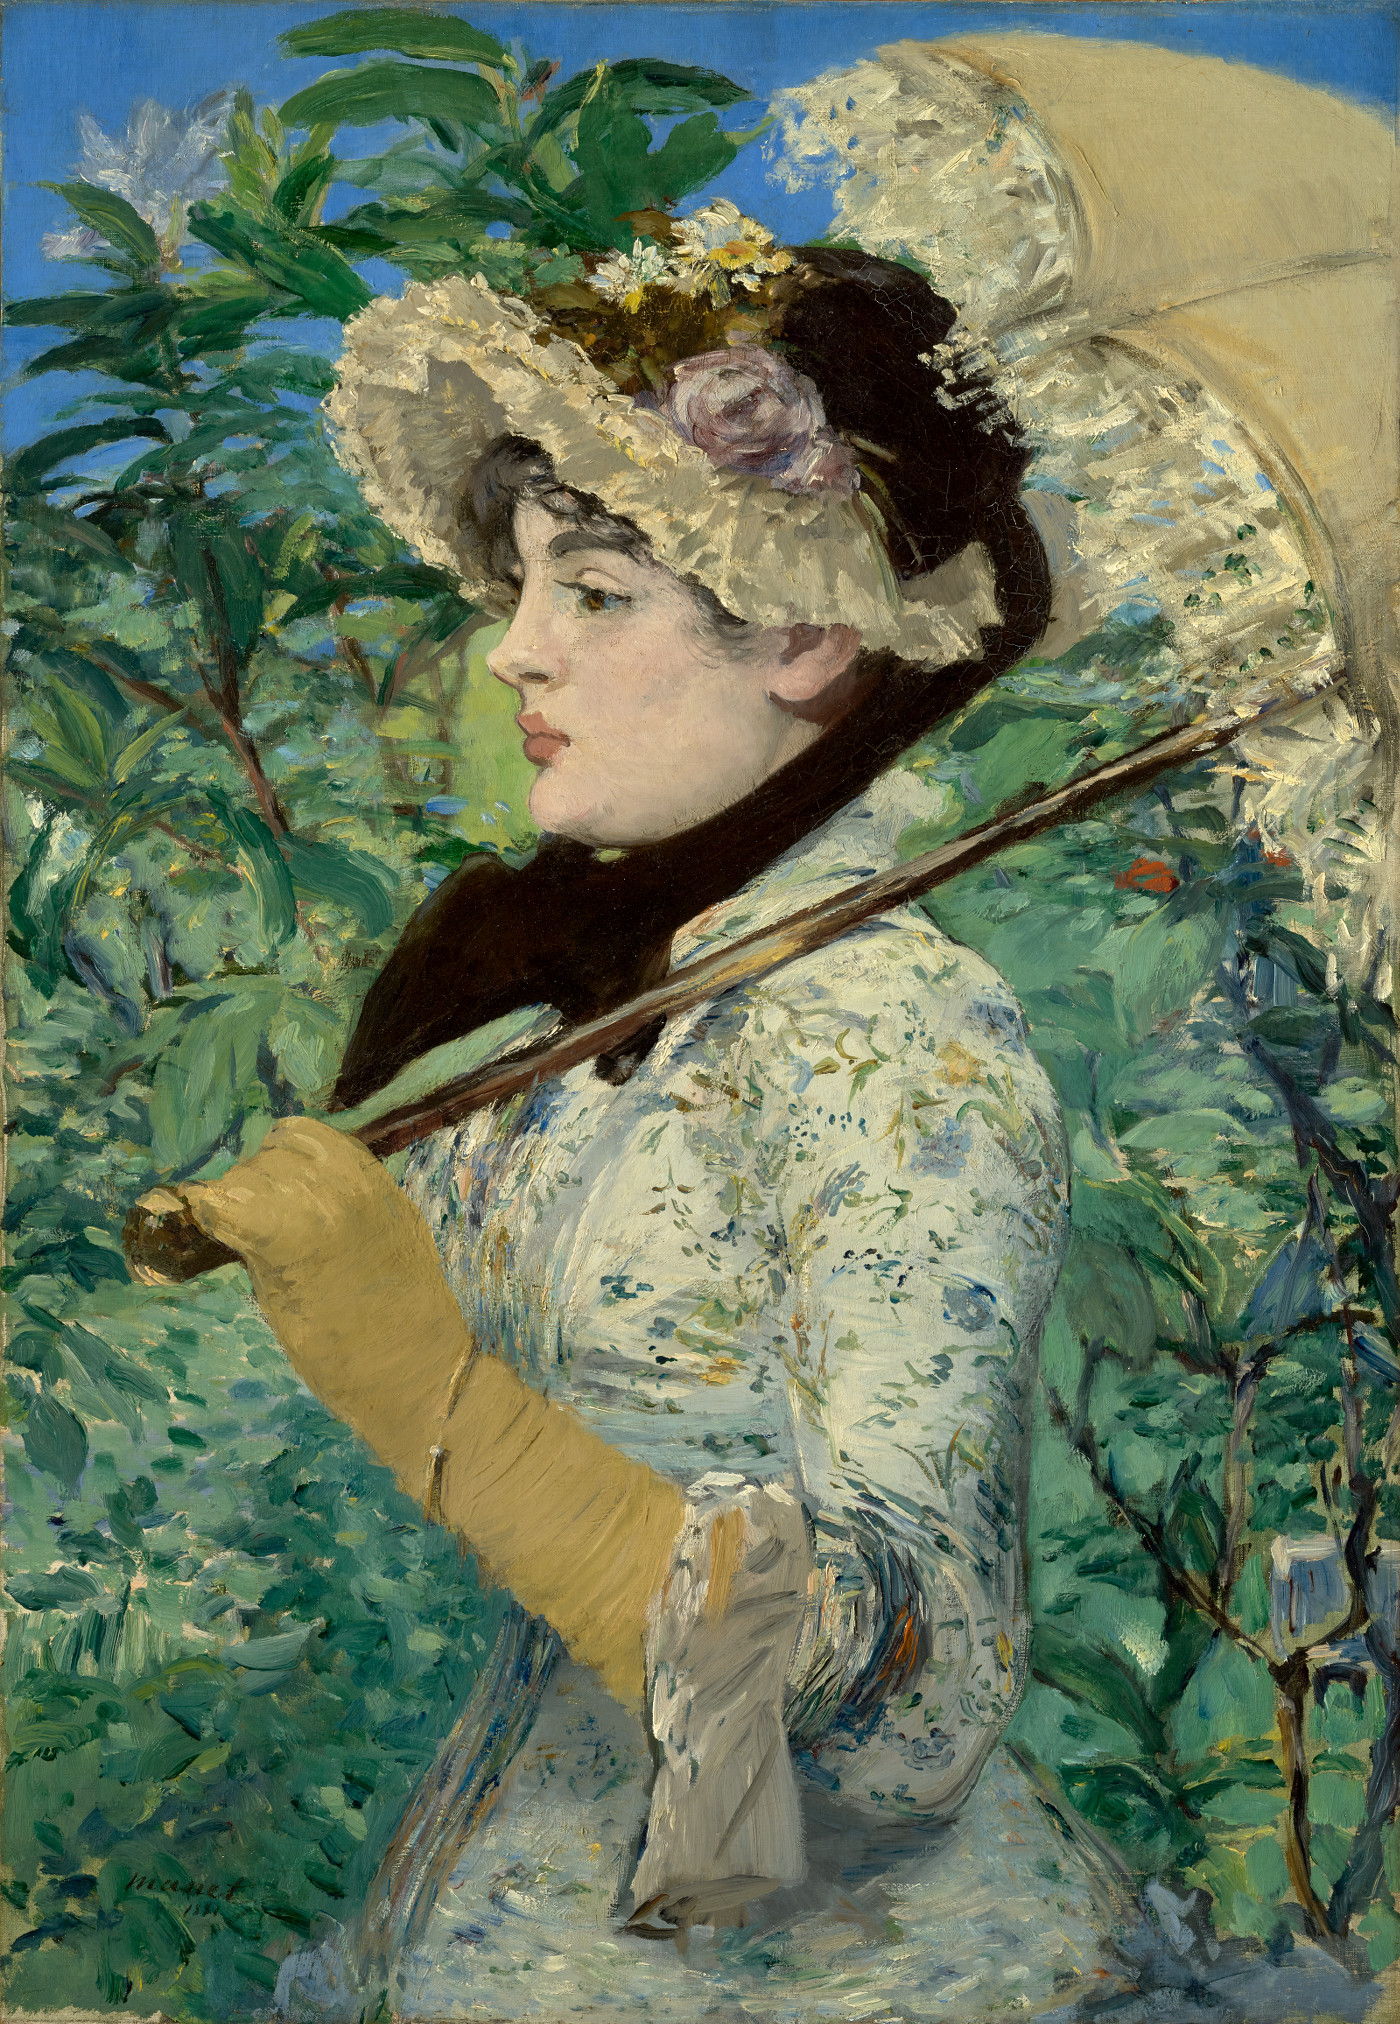 Woman with a parasol by Édouard Manet, 1881